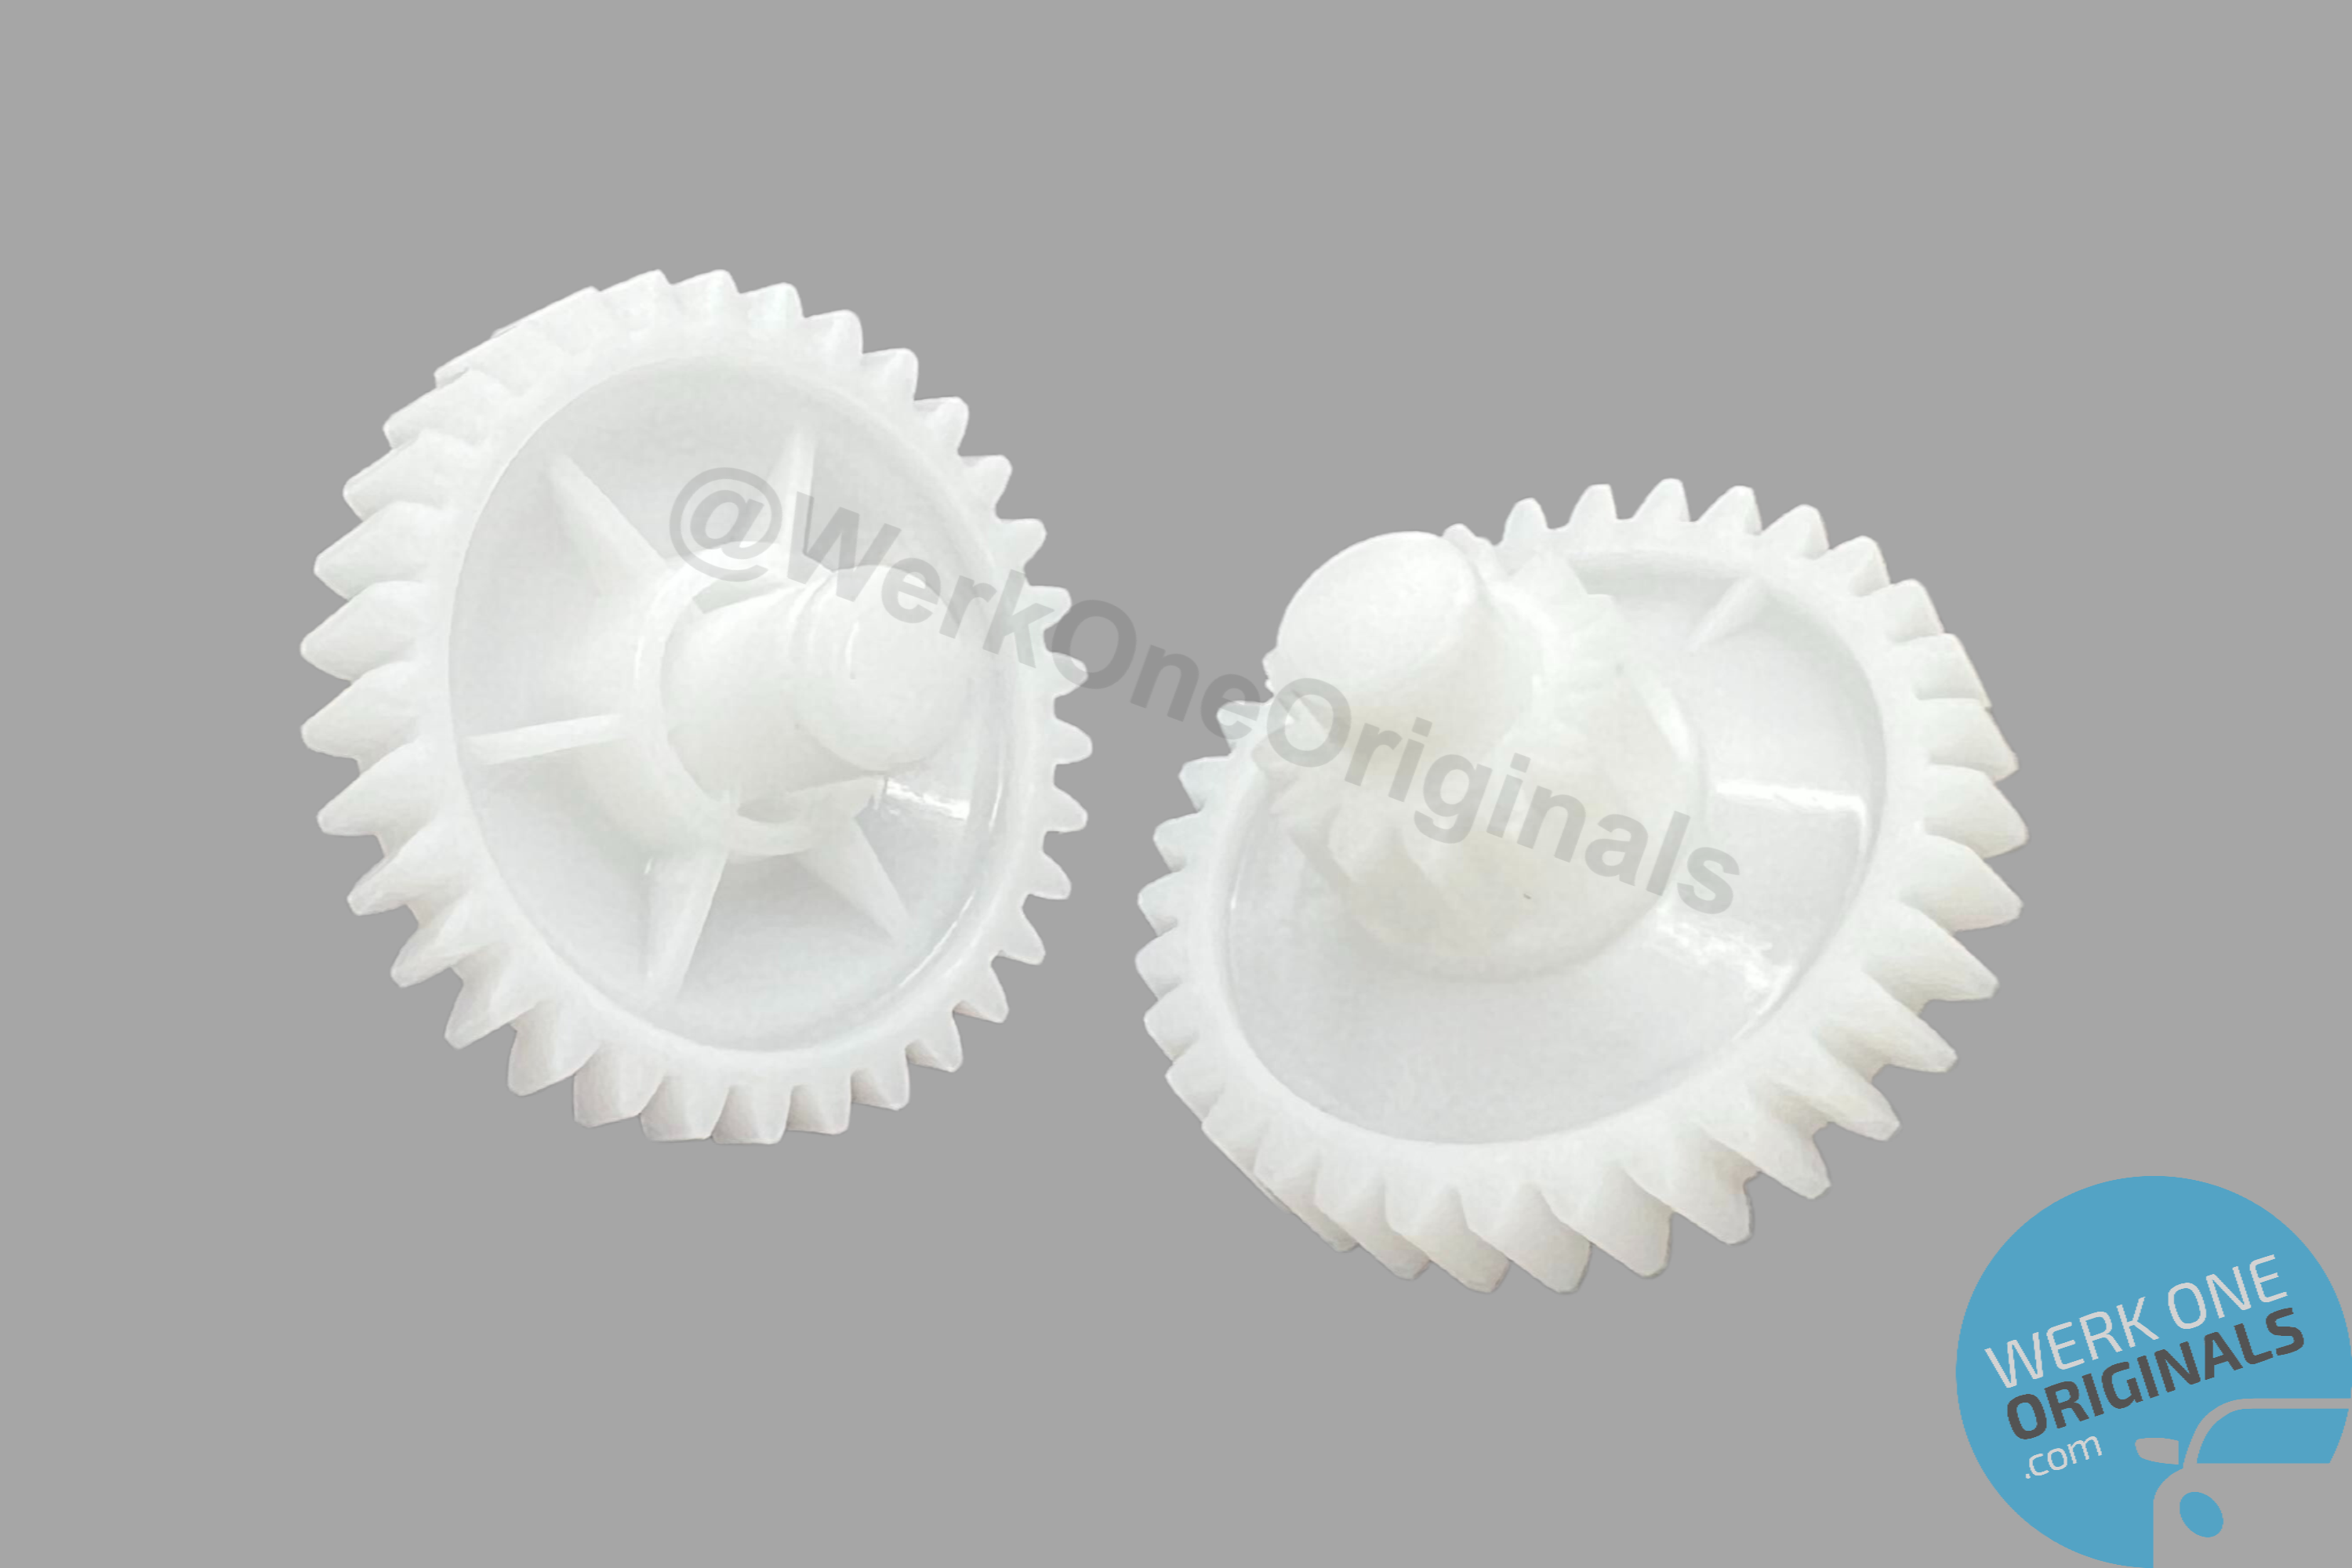 Porsche Genuine Replacement Sunroof Drive Gears x2 for 944 Models